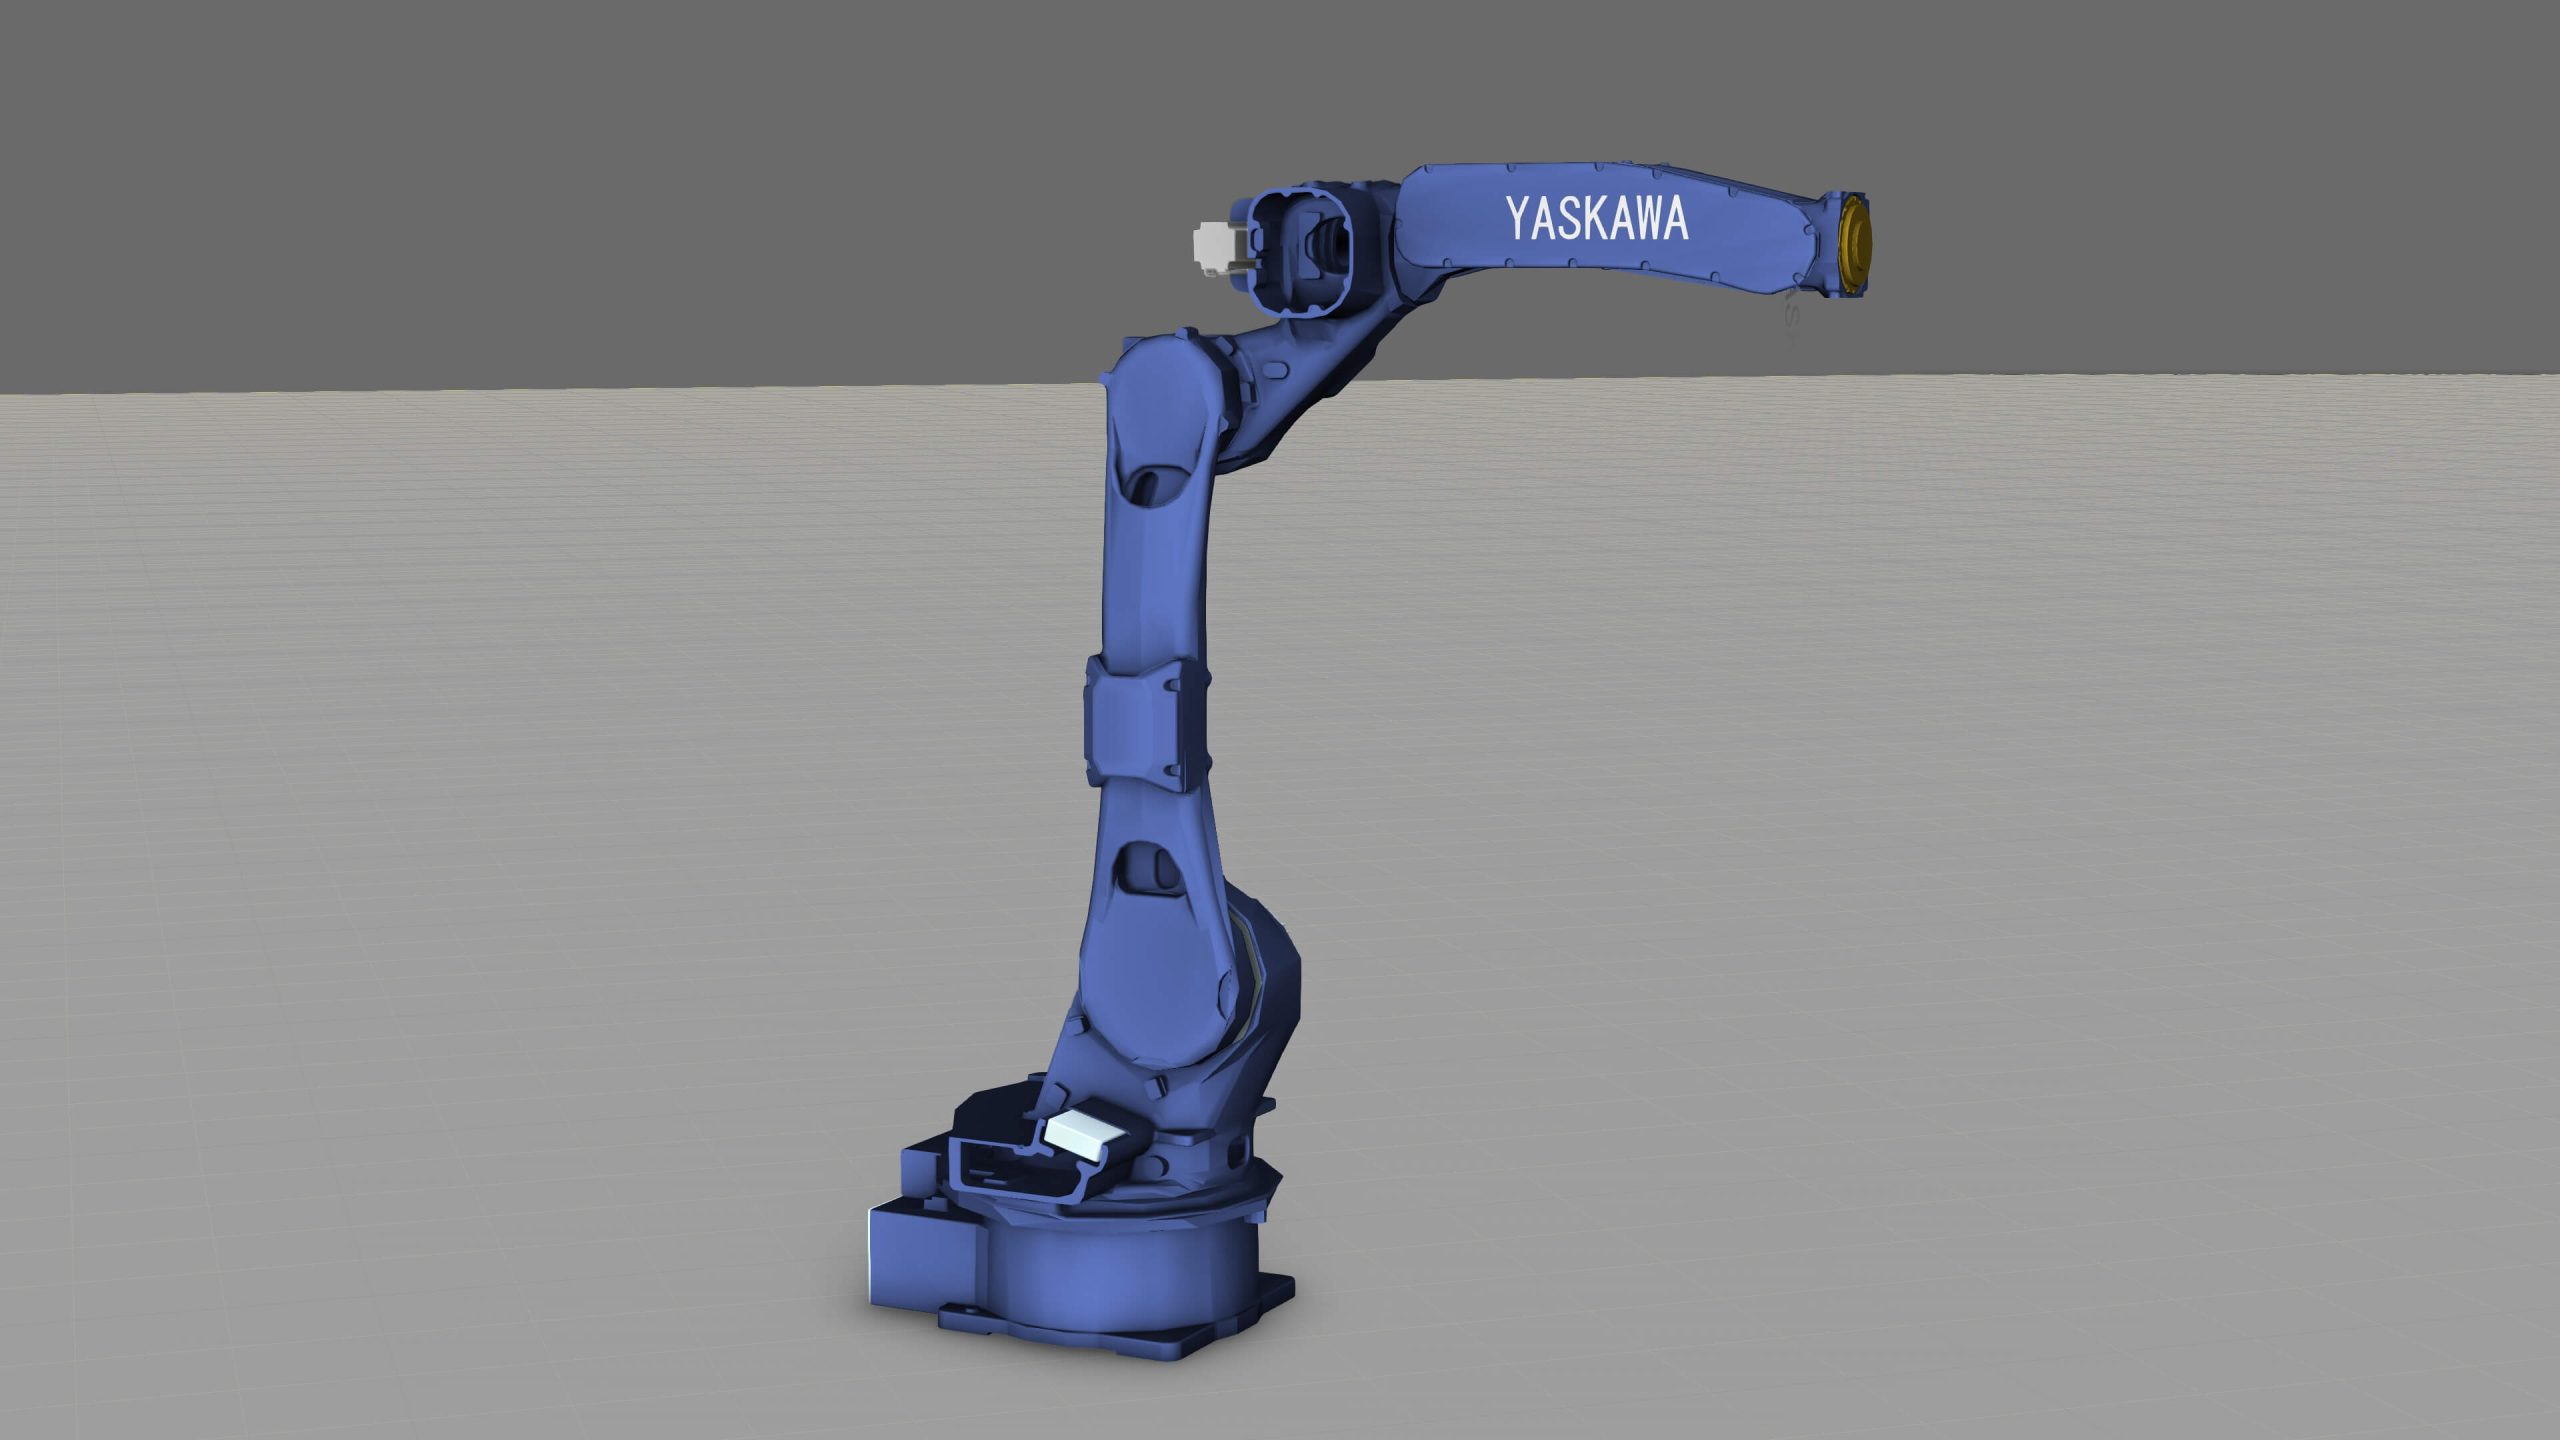 The new Yaskawa component addition to Visual Components eCatalog in December 2018